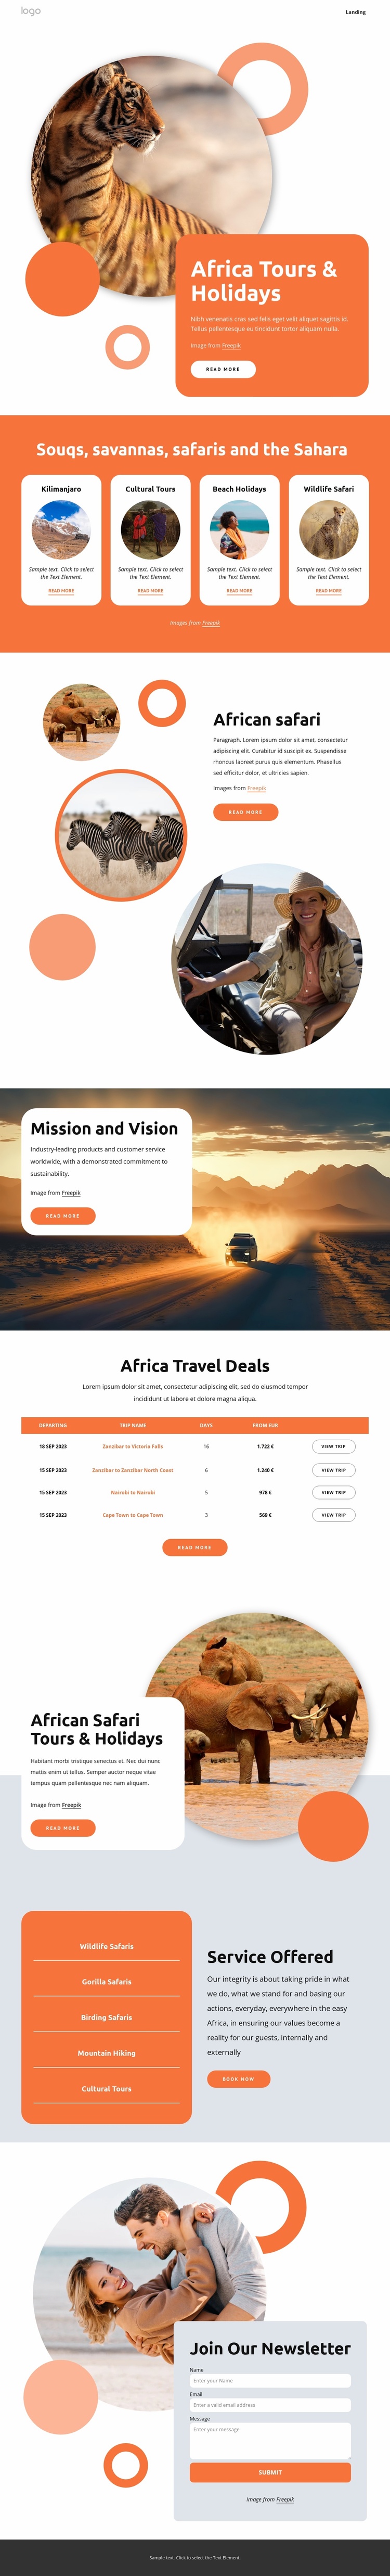 Africa tours and holidays Ecommerce Website Design